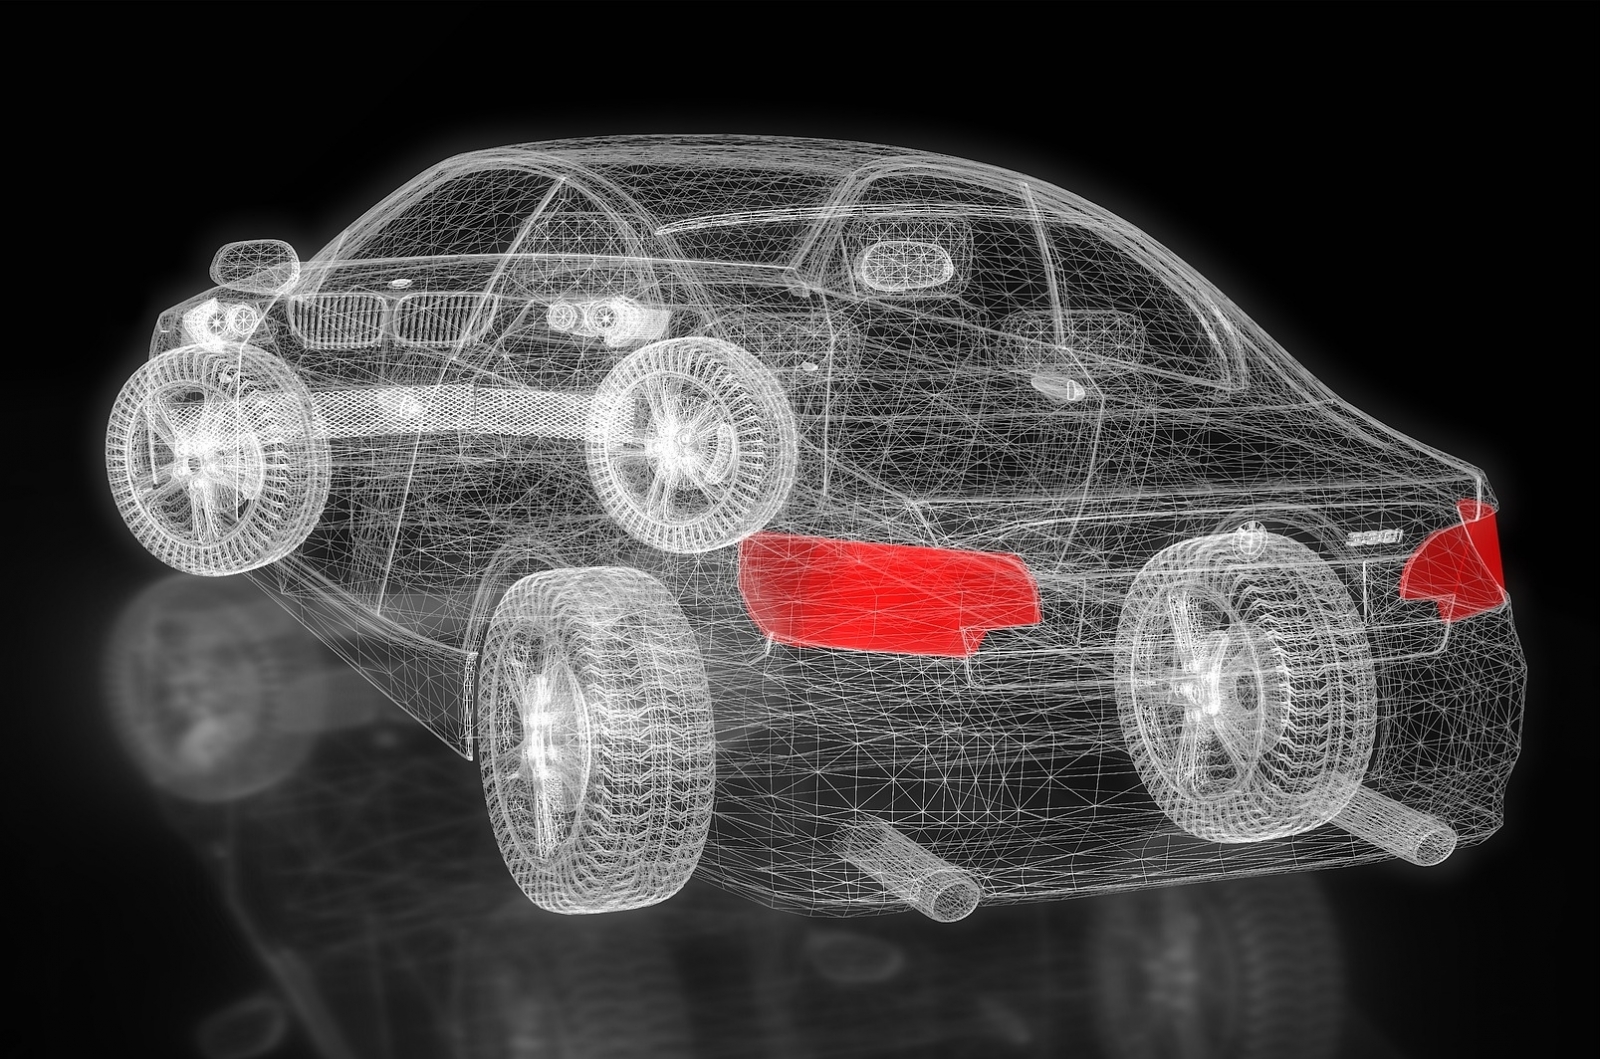 Comfort and Safety in next generation of data driven Automobiles